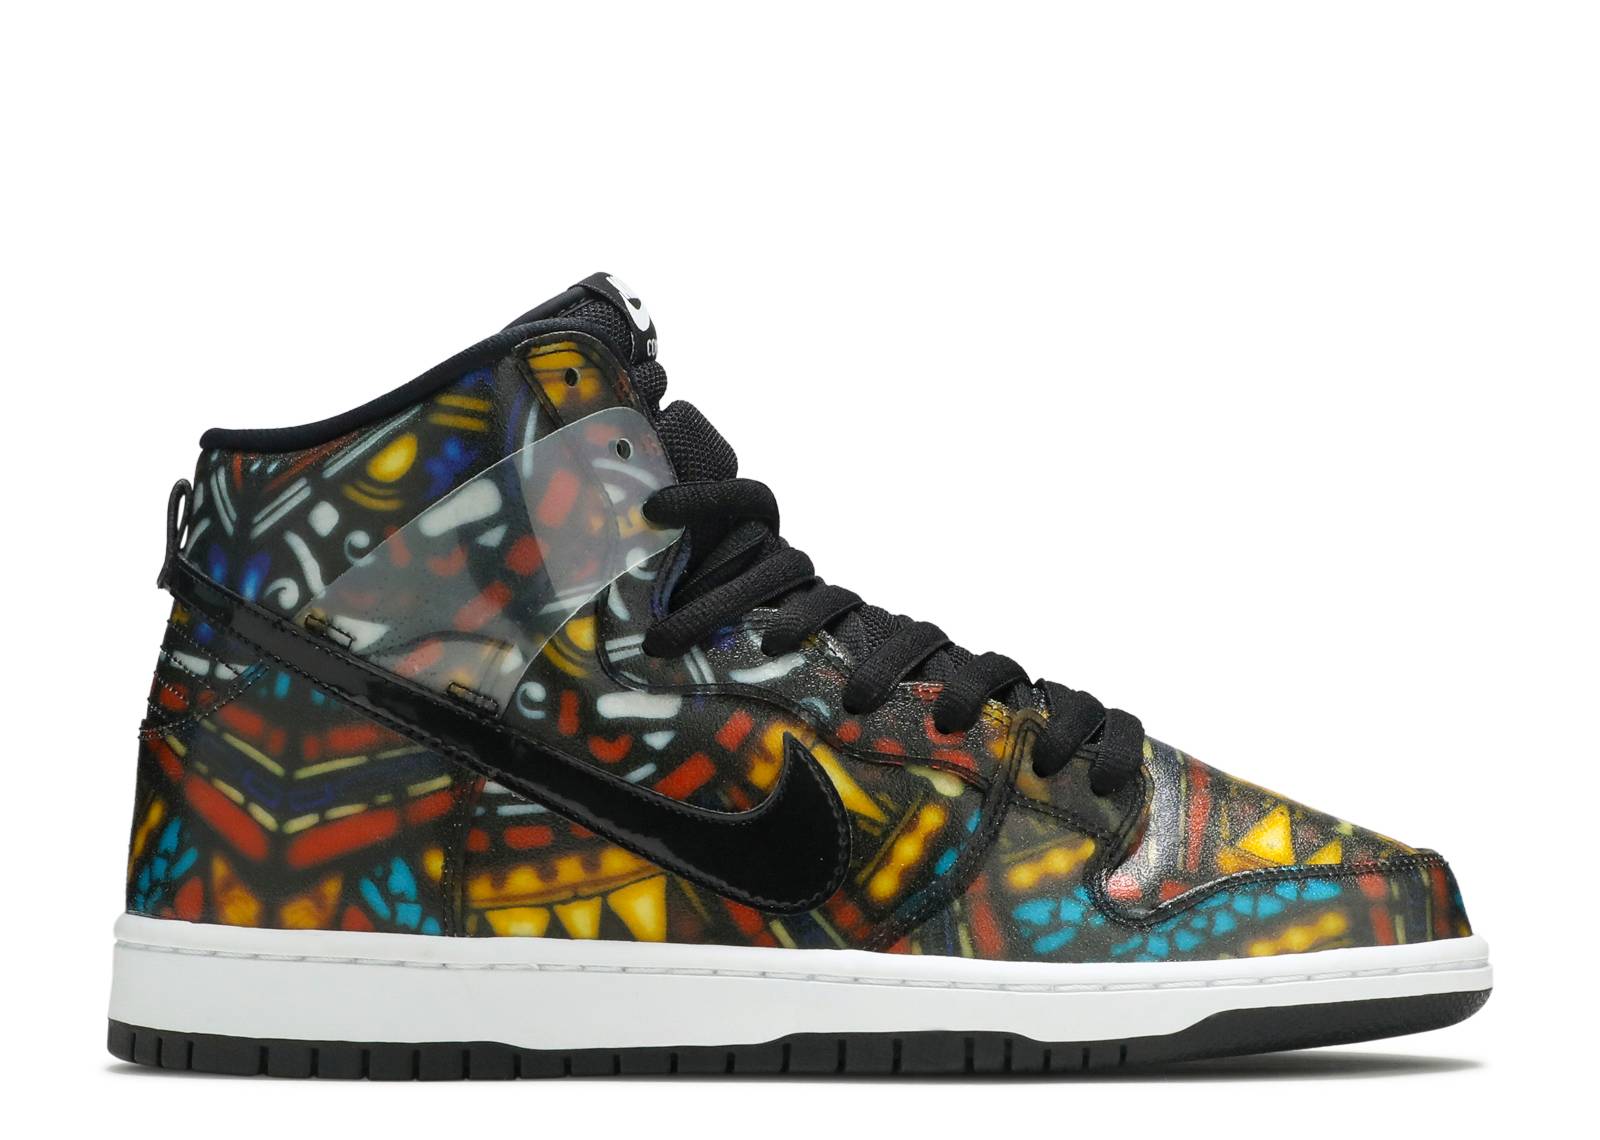 Concepts x SB Dunk High 'Stained Glass' Special Box